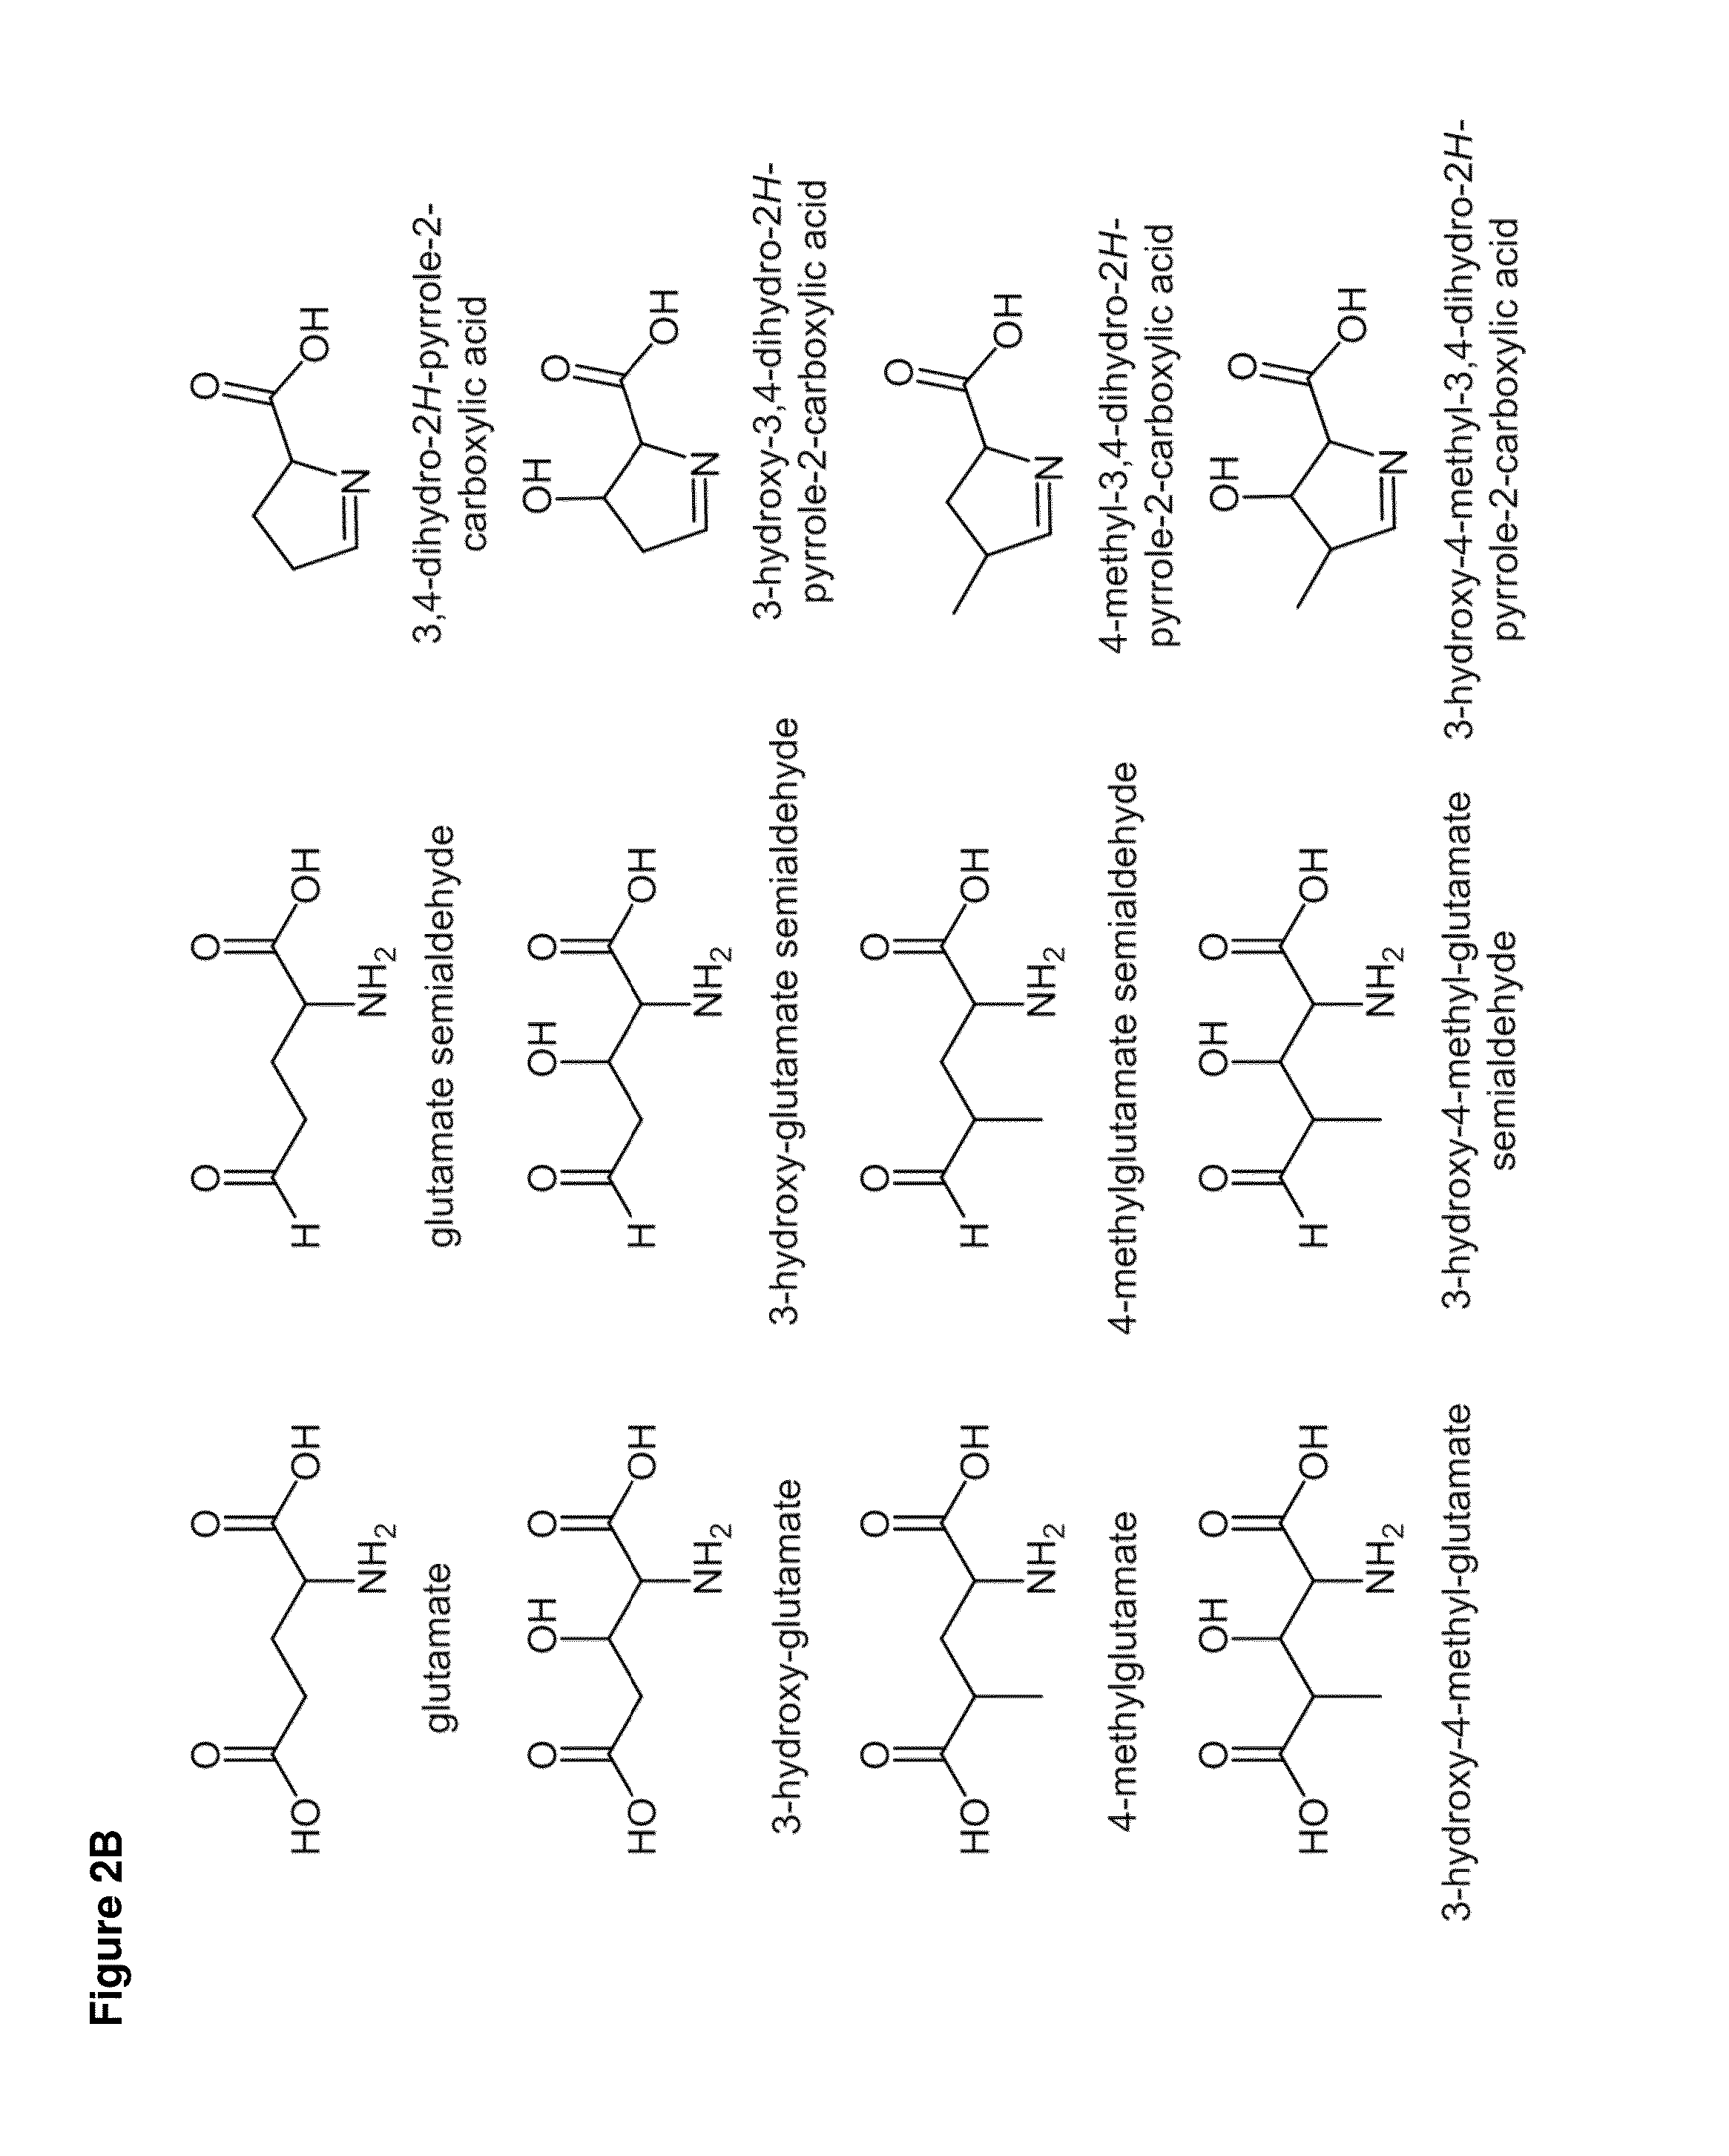 Cell-free preparation of carbapenems